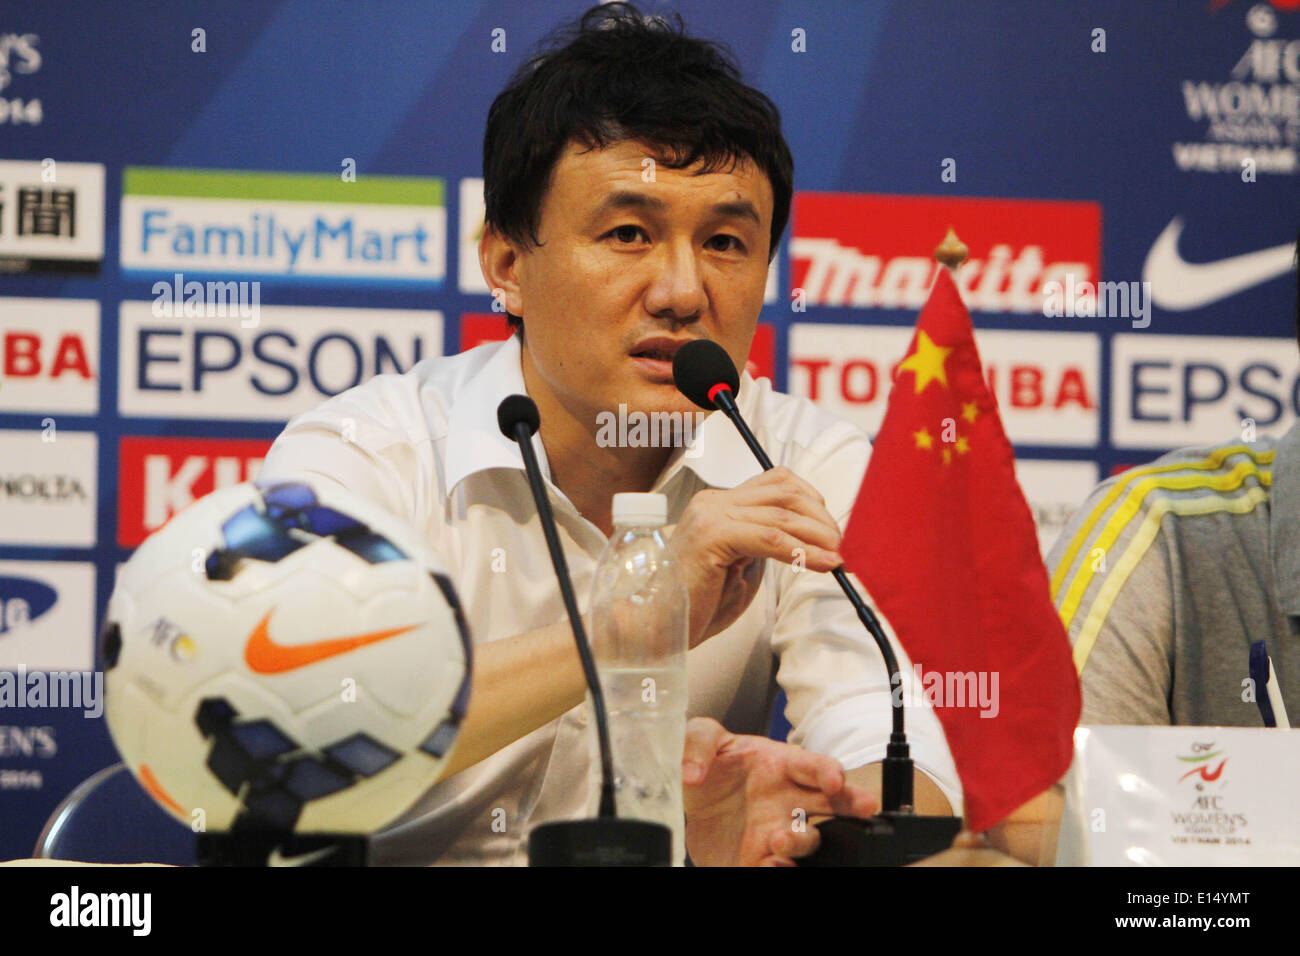 Ho Chi Minh City, Vietnam. 22nd May, 2014. Hao Wei, head coach of China, speaks at the press conference after semi-final against Japan during the 2014 Asian Football Confederation (AFC) Women's Asian Cup at Thong Nhat Stadium in Ho Chi Minh City, Vietnam, on May 22, 2014. Japan advanced to final after beating China 2-1. © Nguyen Le Huyen/Xinhua/Alamy Live News Stock Photo